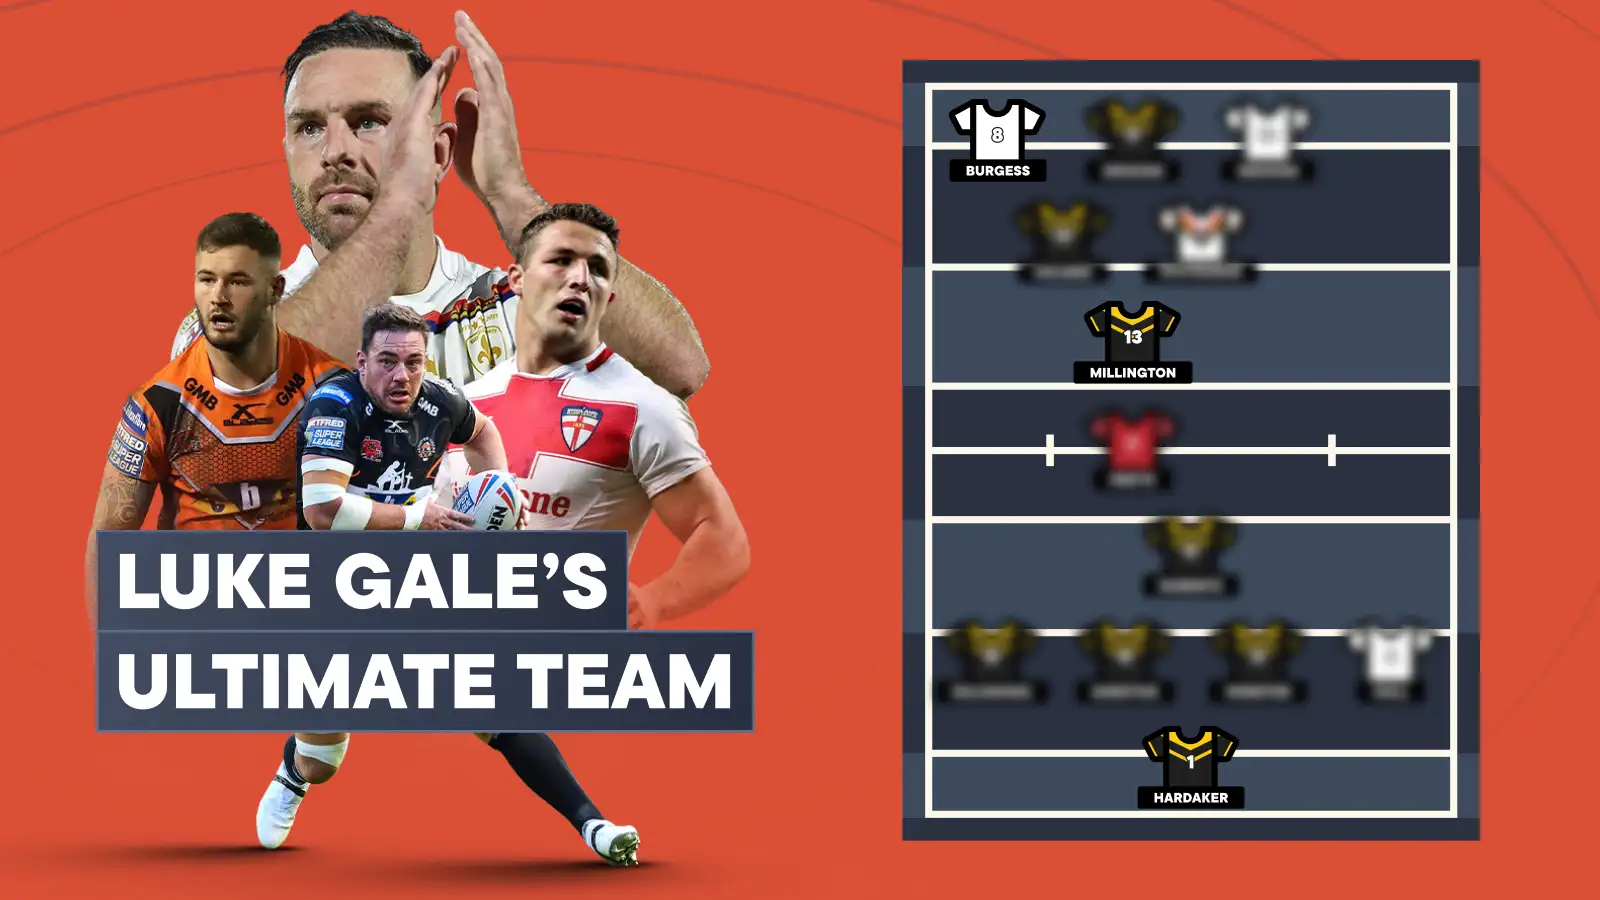 My Ultimate Team: Luke Gale selects his best 1-17 including Castleford, Leeds, England stars